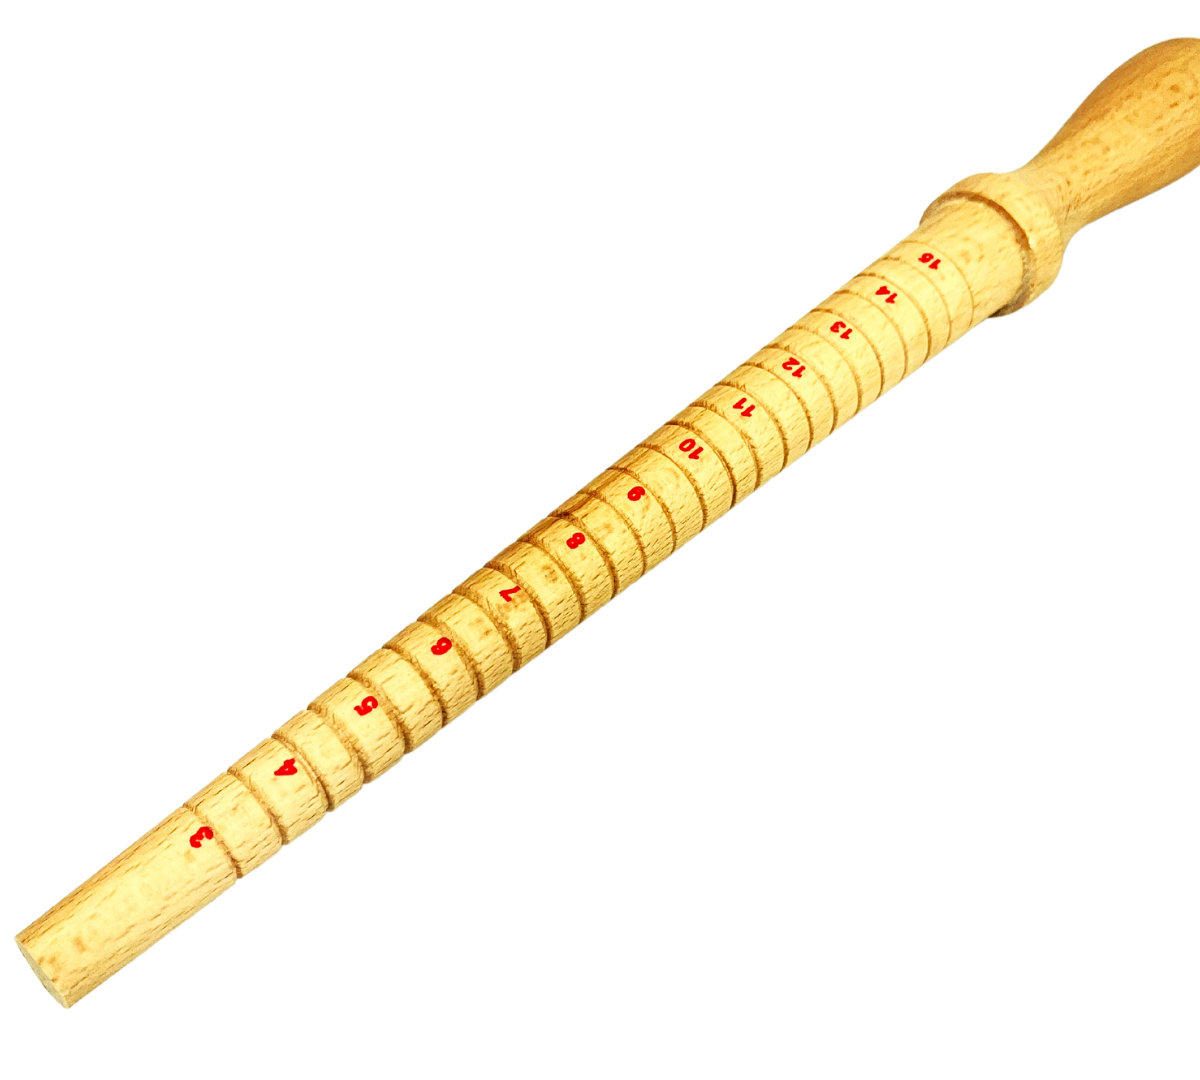 13" Classic Ring Mandrel | Sizes 3-15 Marked | Half Increment Sizes Included